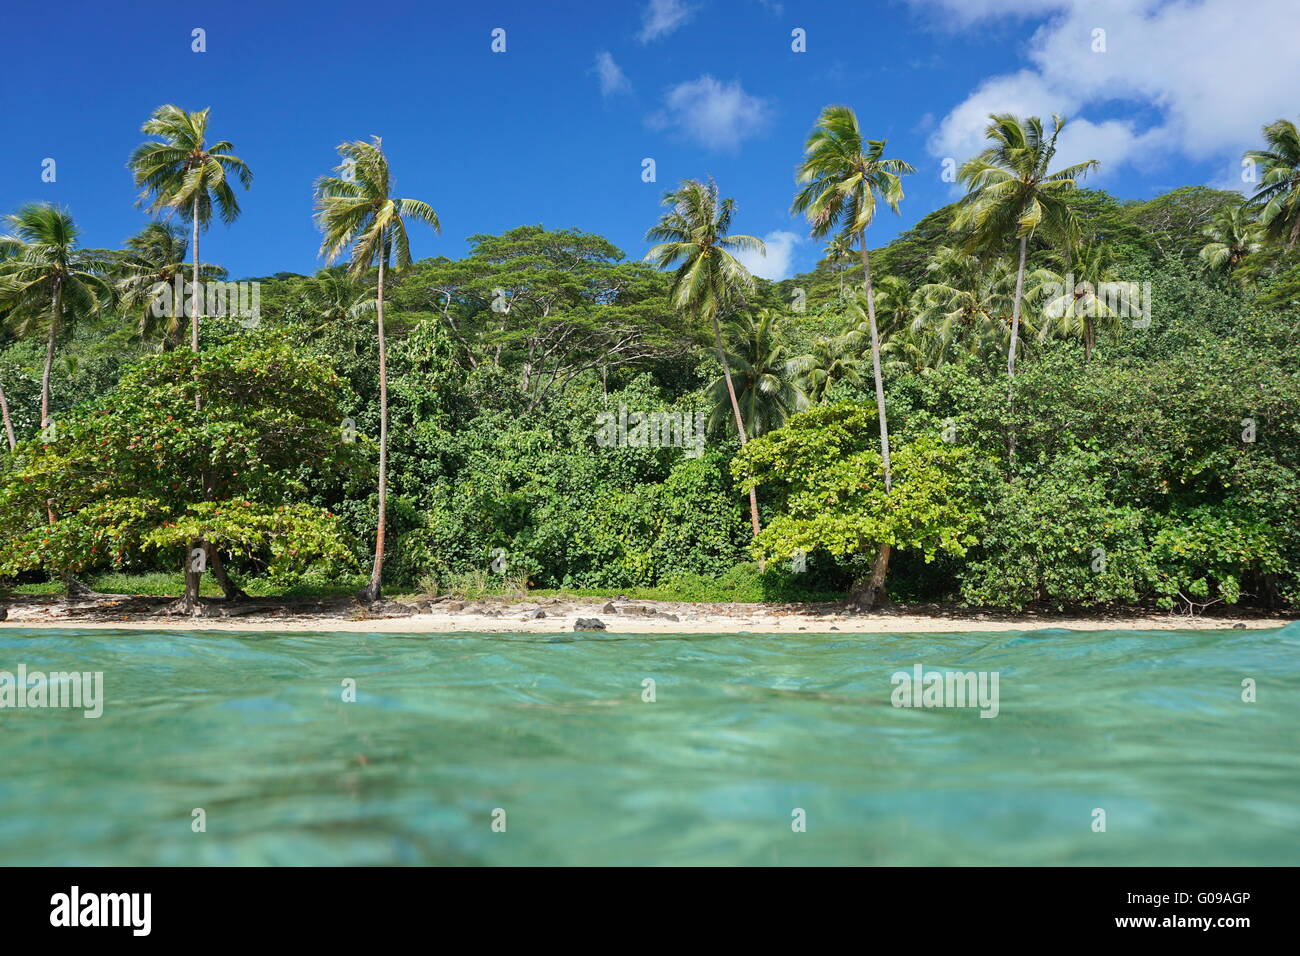 Coastal landscape of a shore with lush tropical vegetation, Huahine island, Pacific ocean, French Polynesia Stock Photo